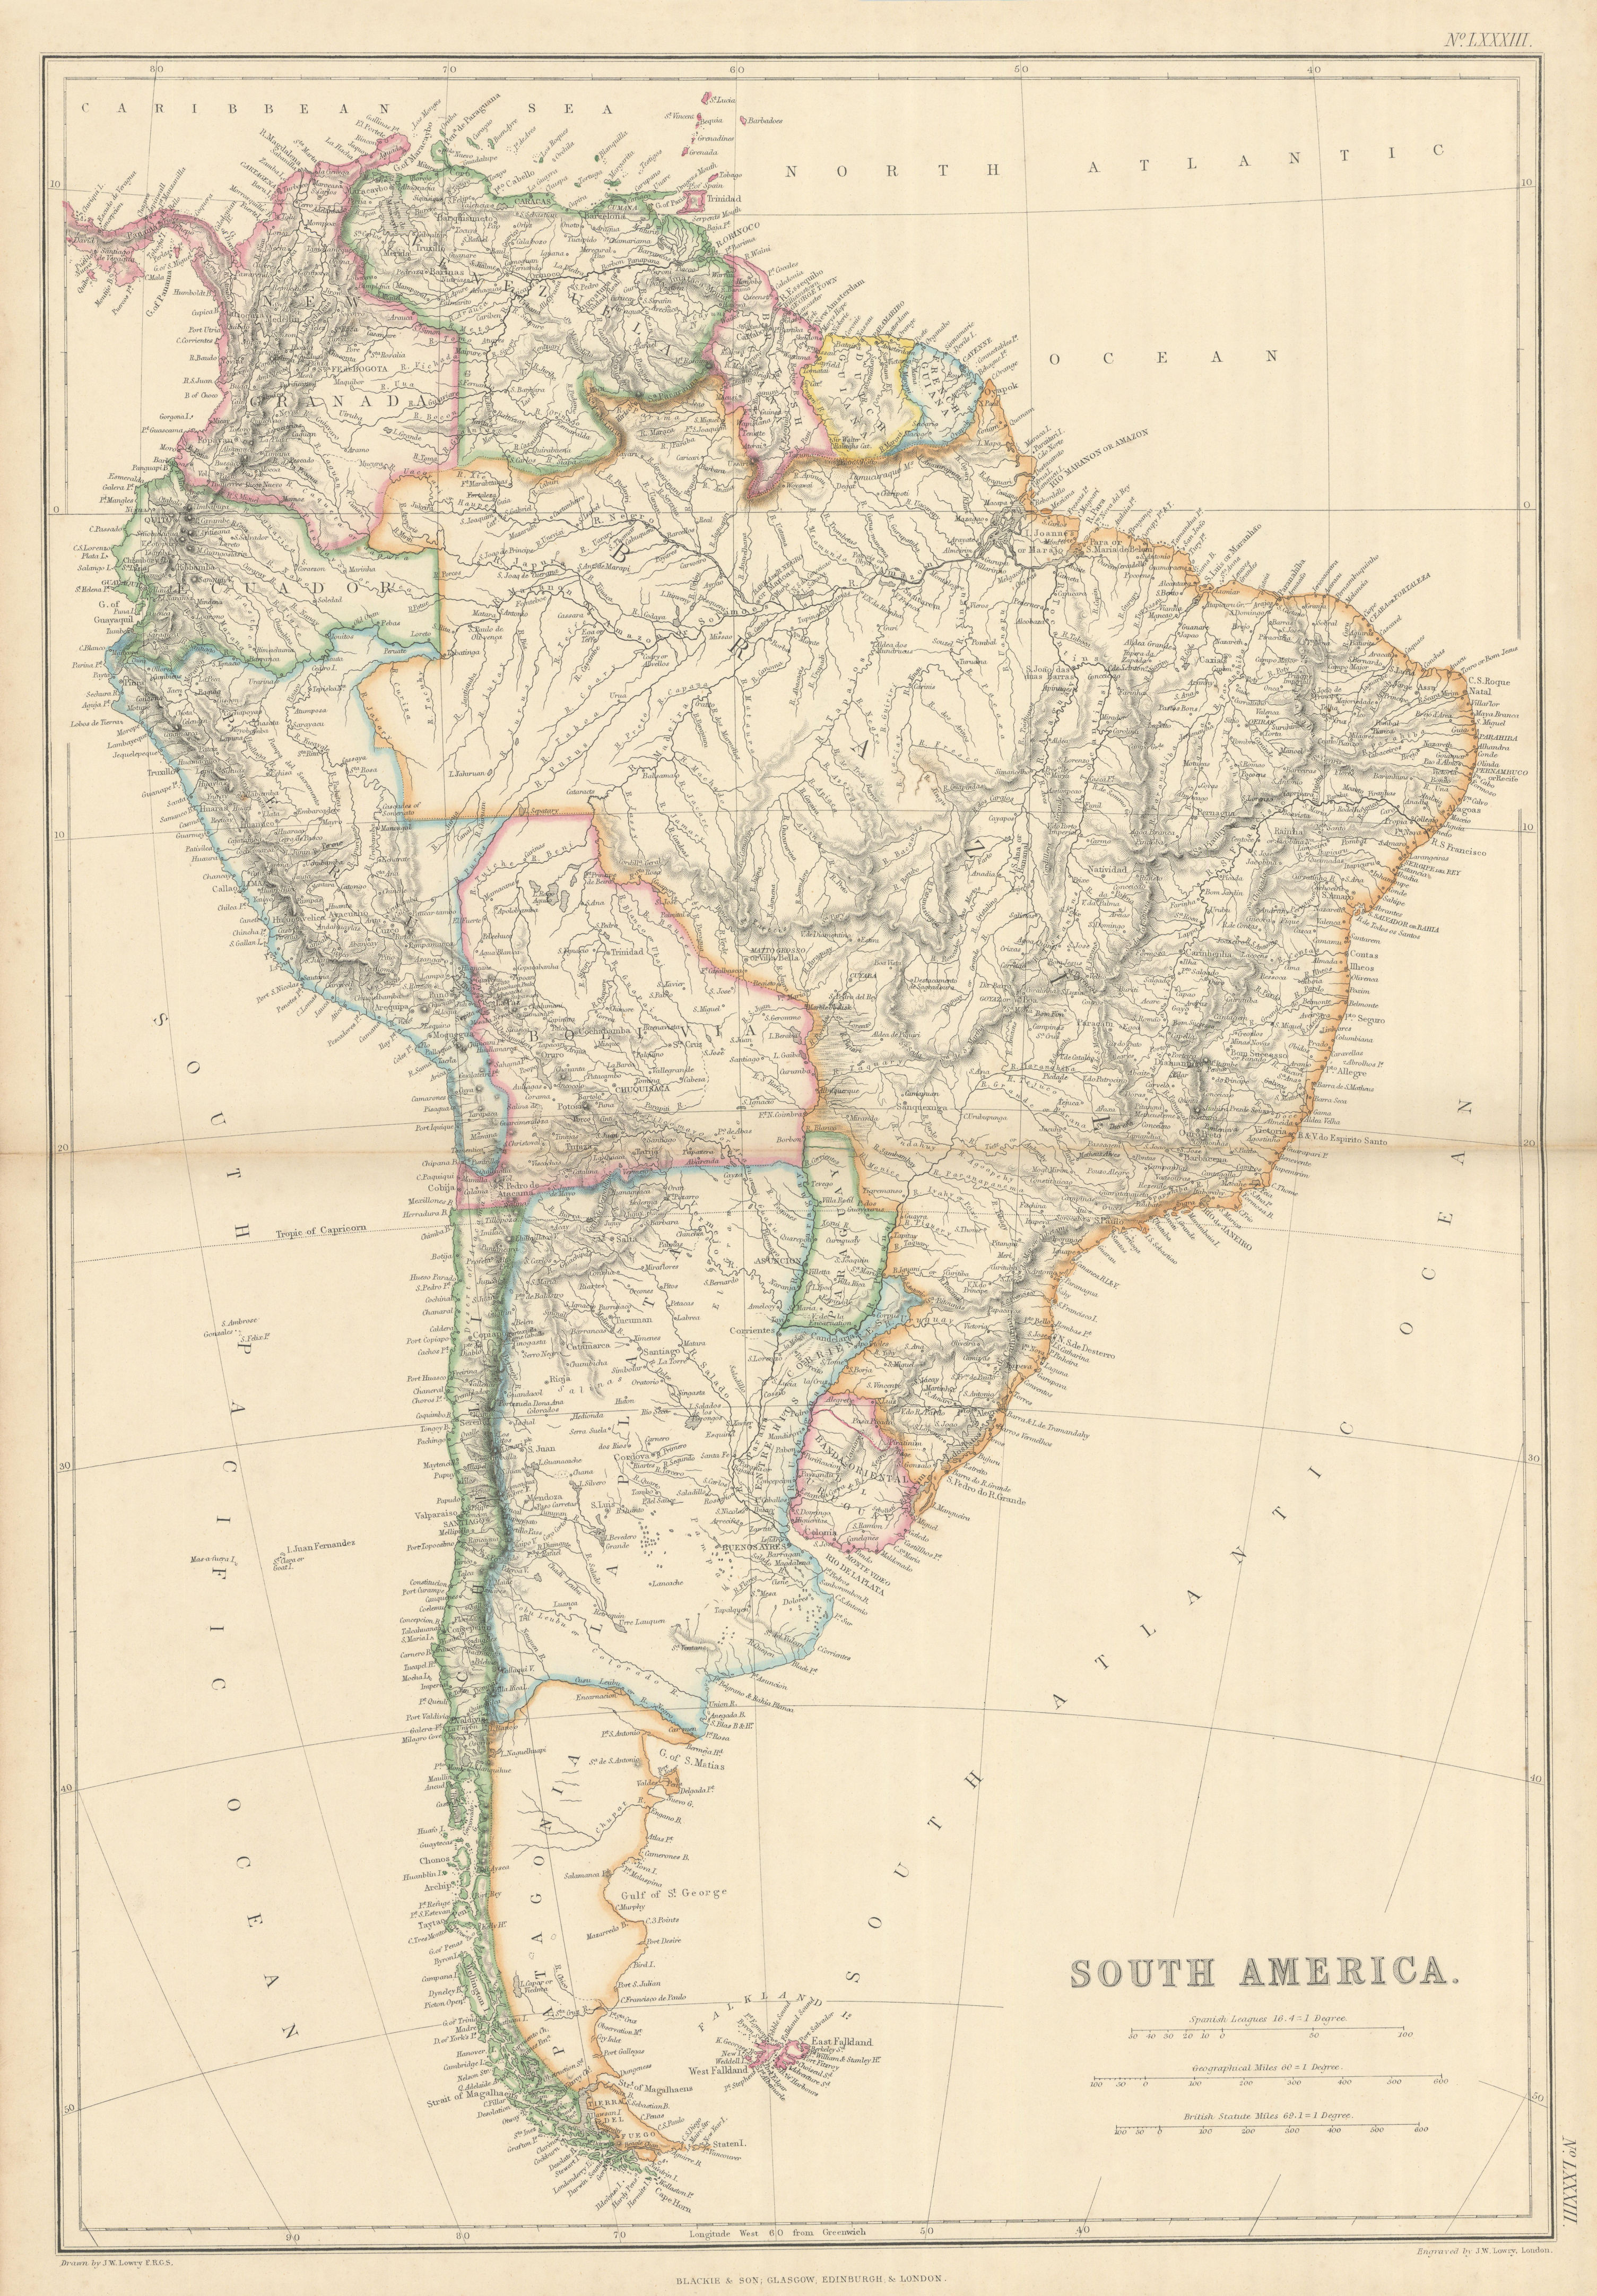 Associate Product South America by Joseph Wilson Lowry. Banda Oriental. Patagonia 1860 old map